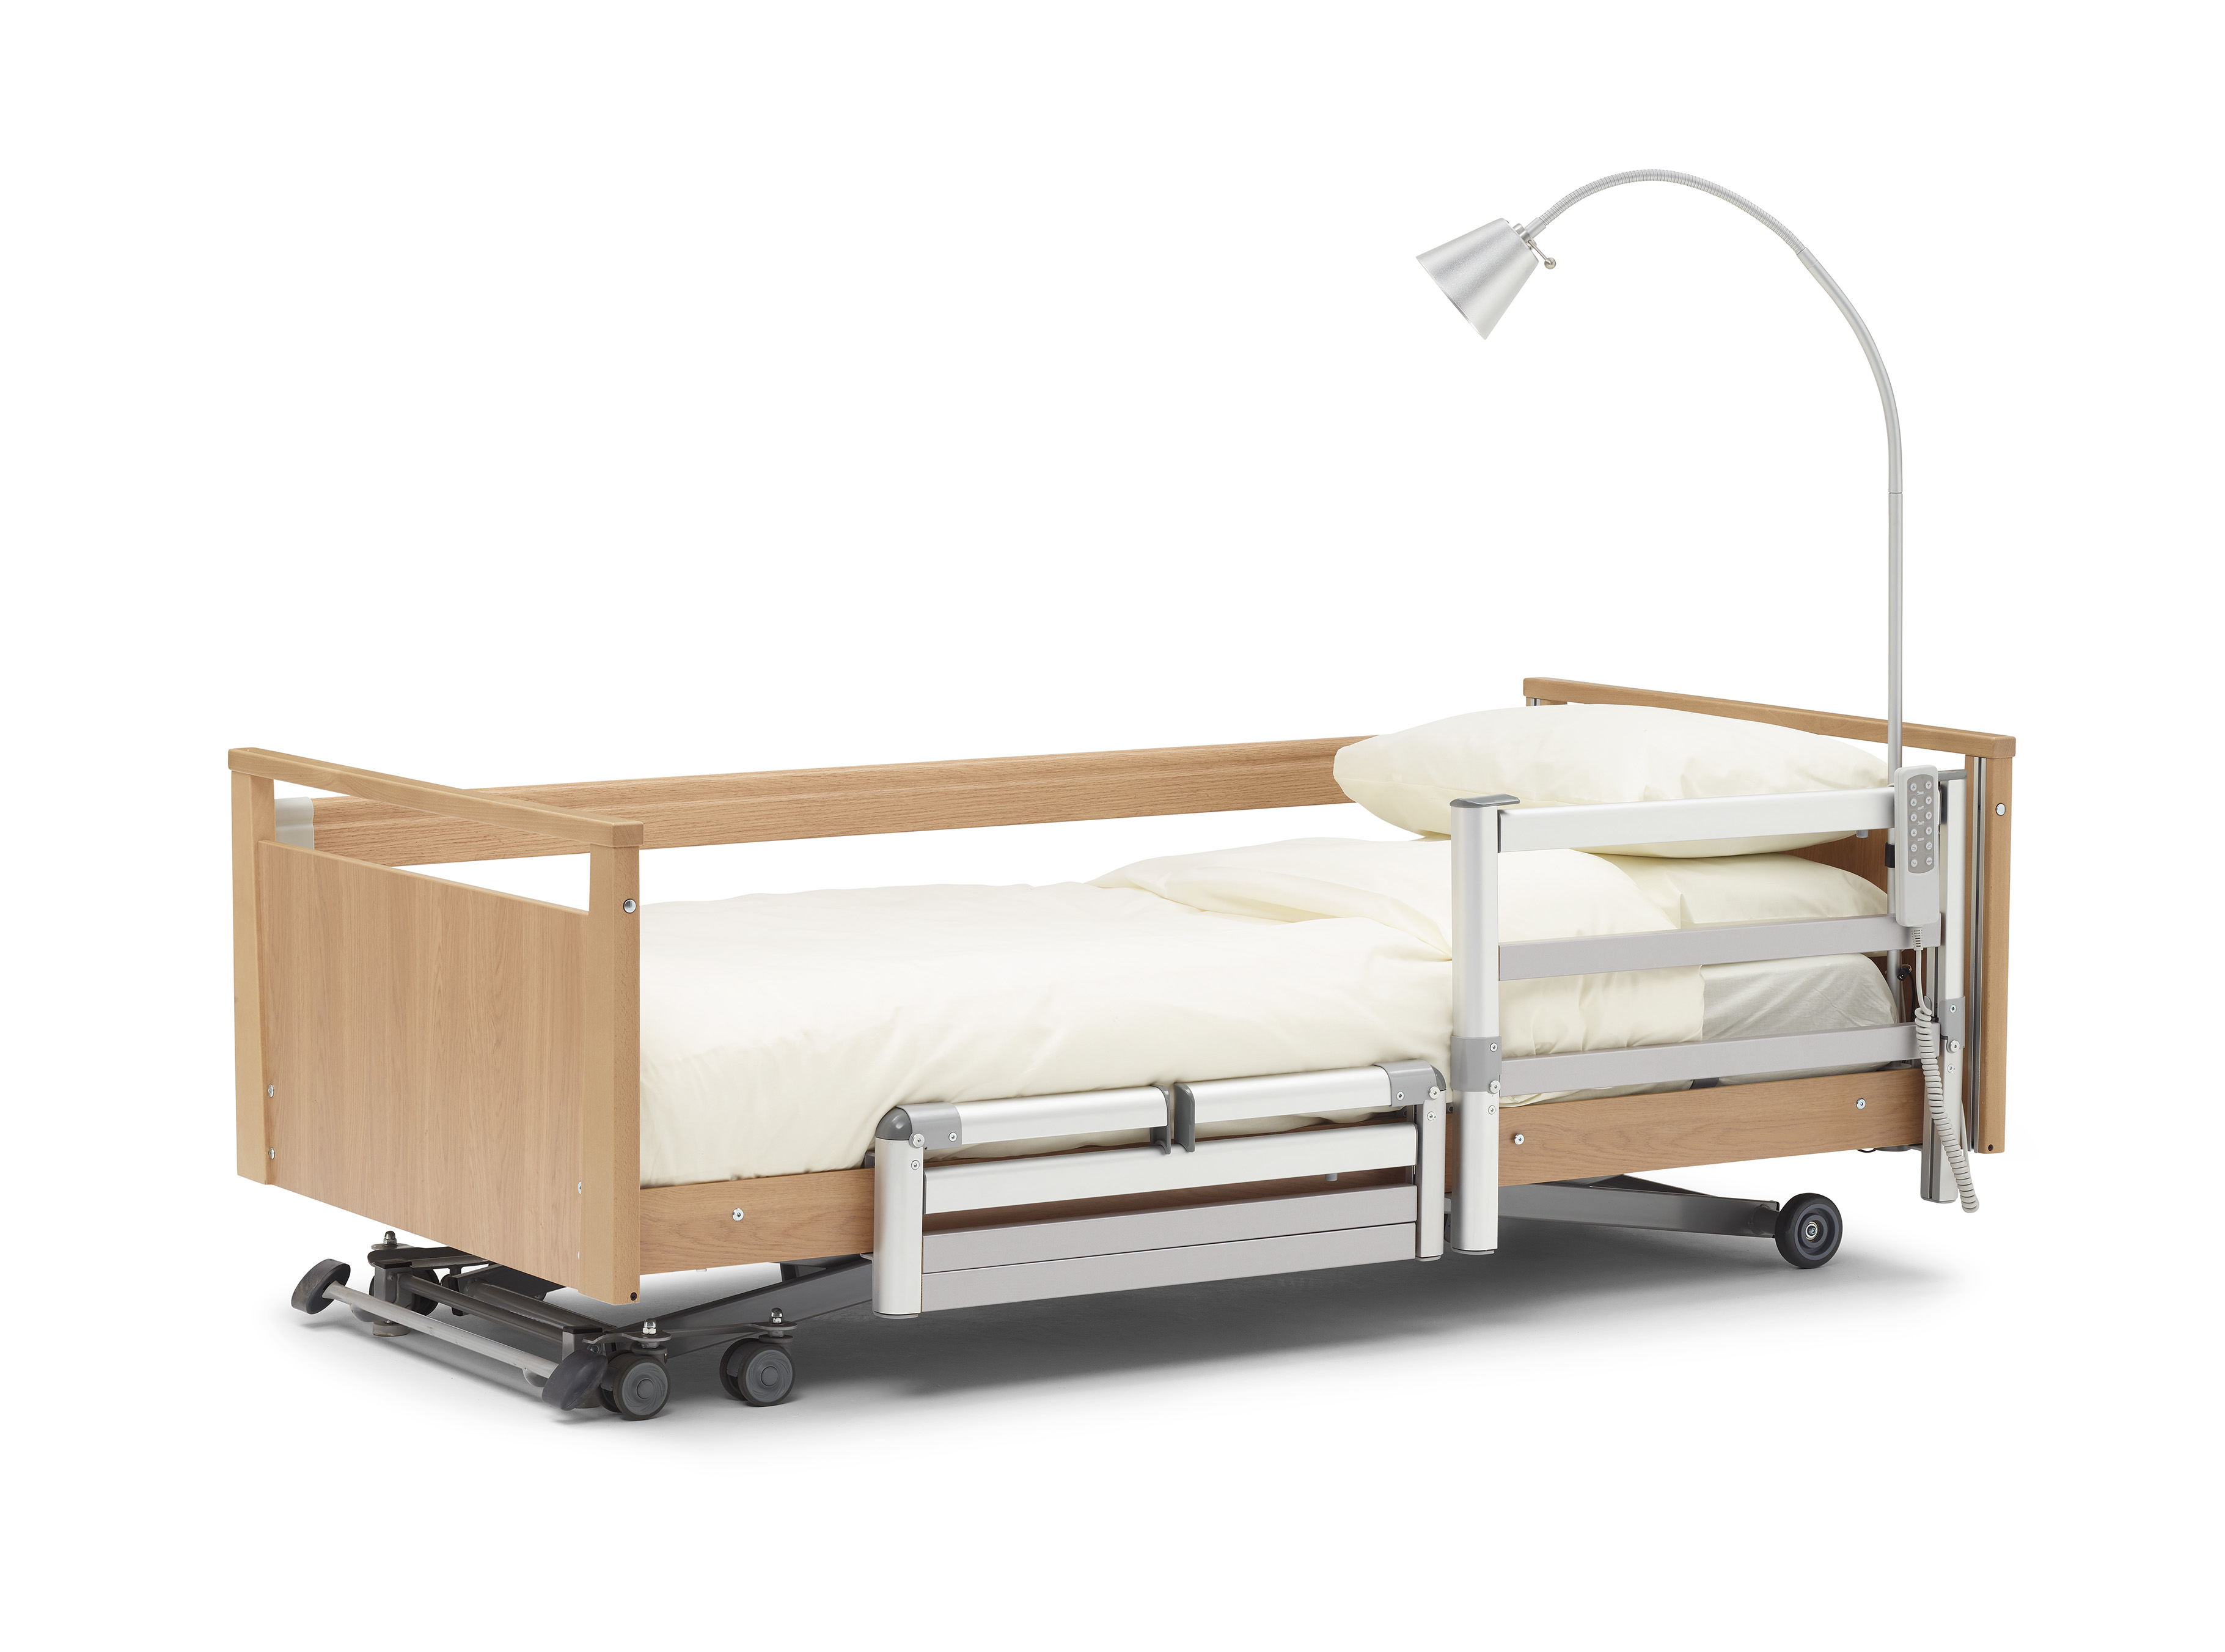 Impress 3 bed c/w Classic head/foot boards and side skirts only
Finish: Light Sorano Oak